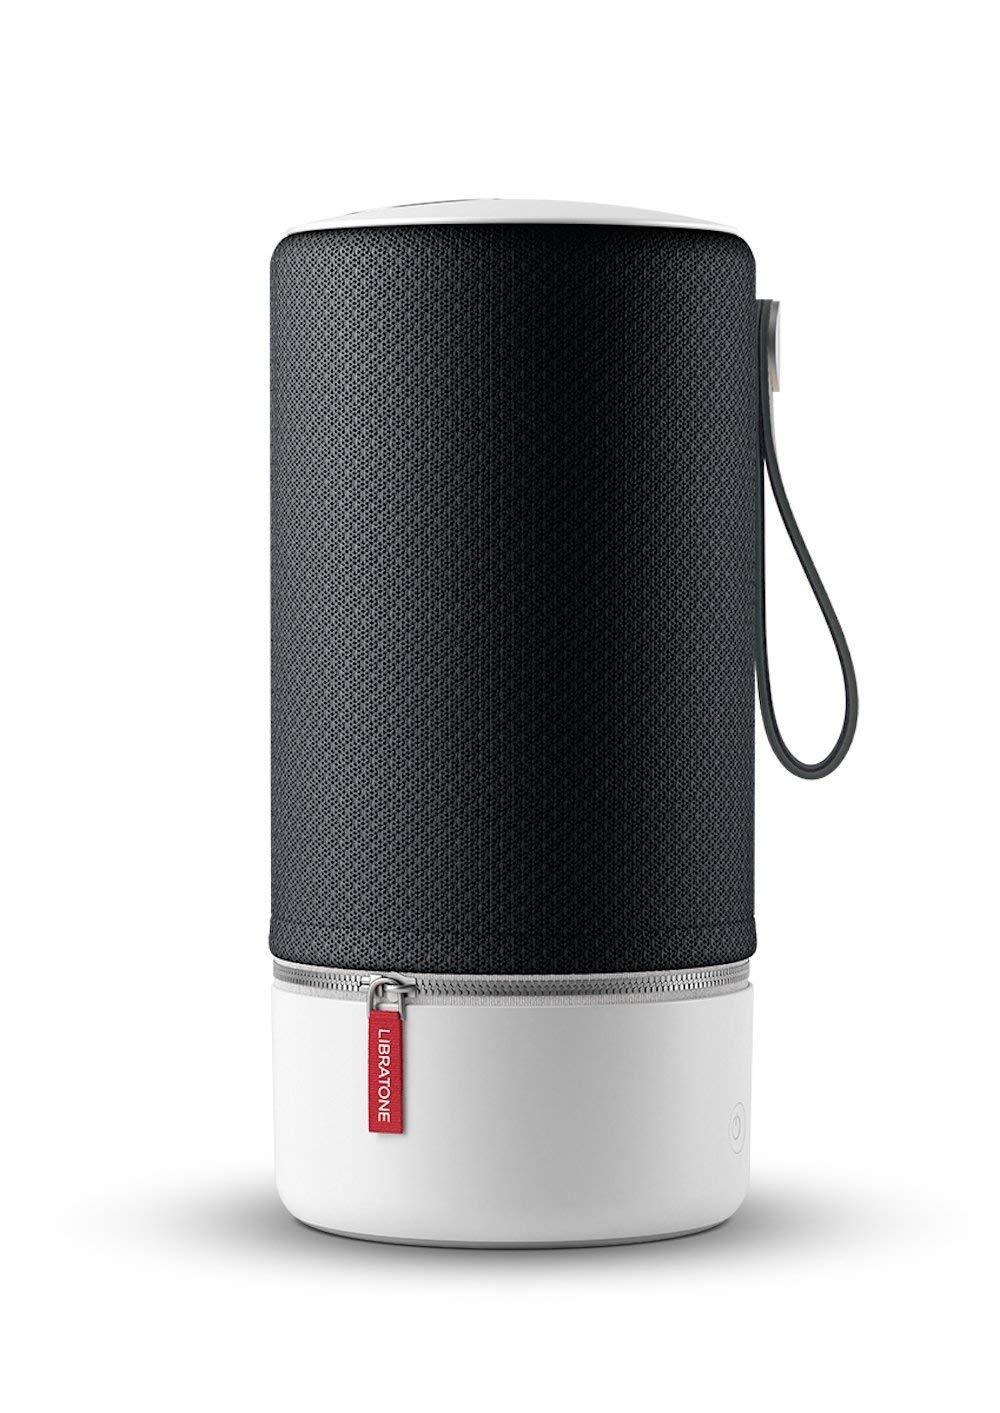 Libratone ZIPP Speakers Get AirPlay 2 Support